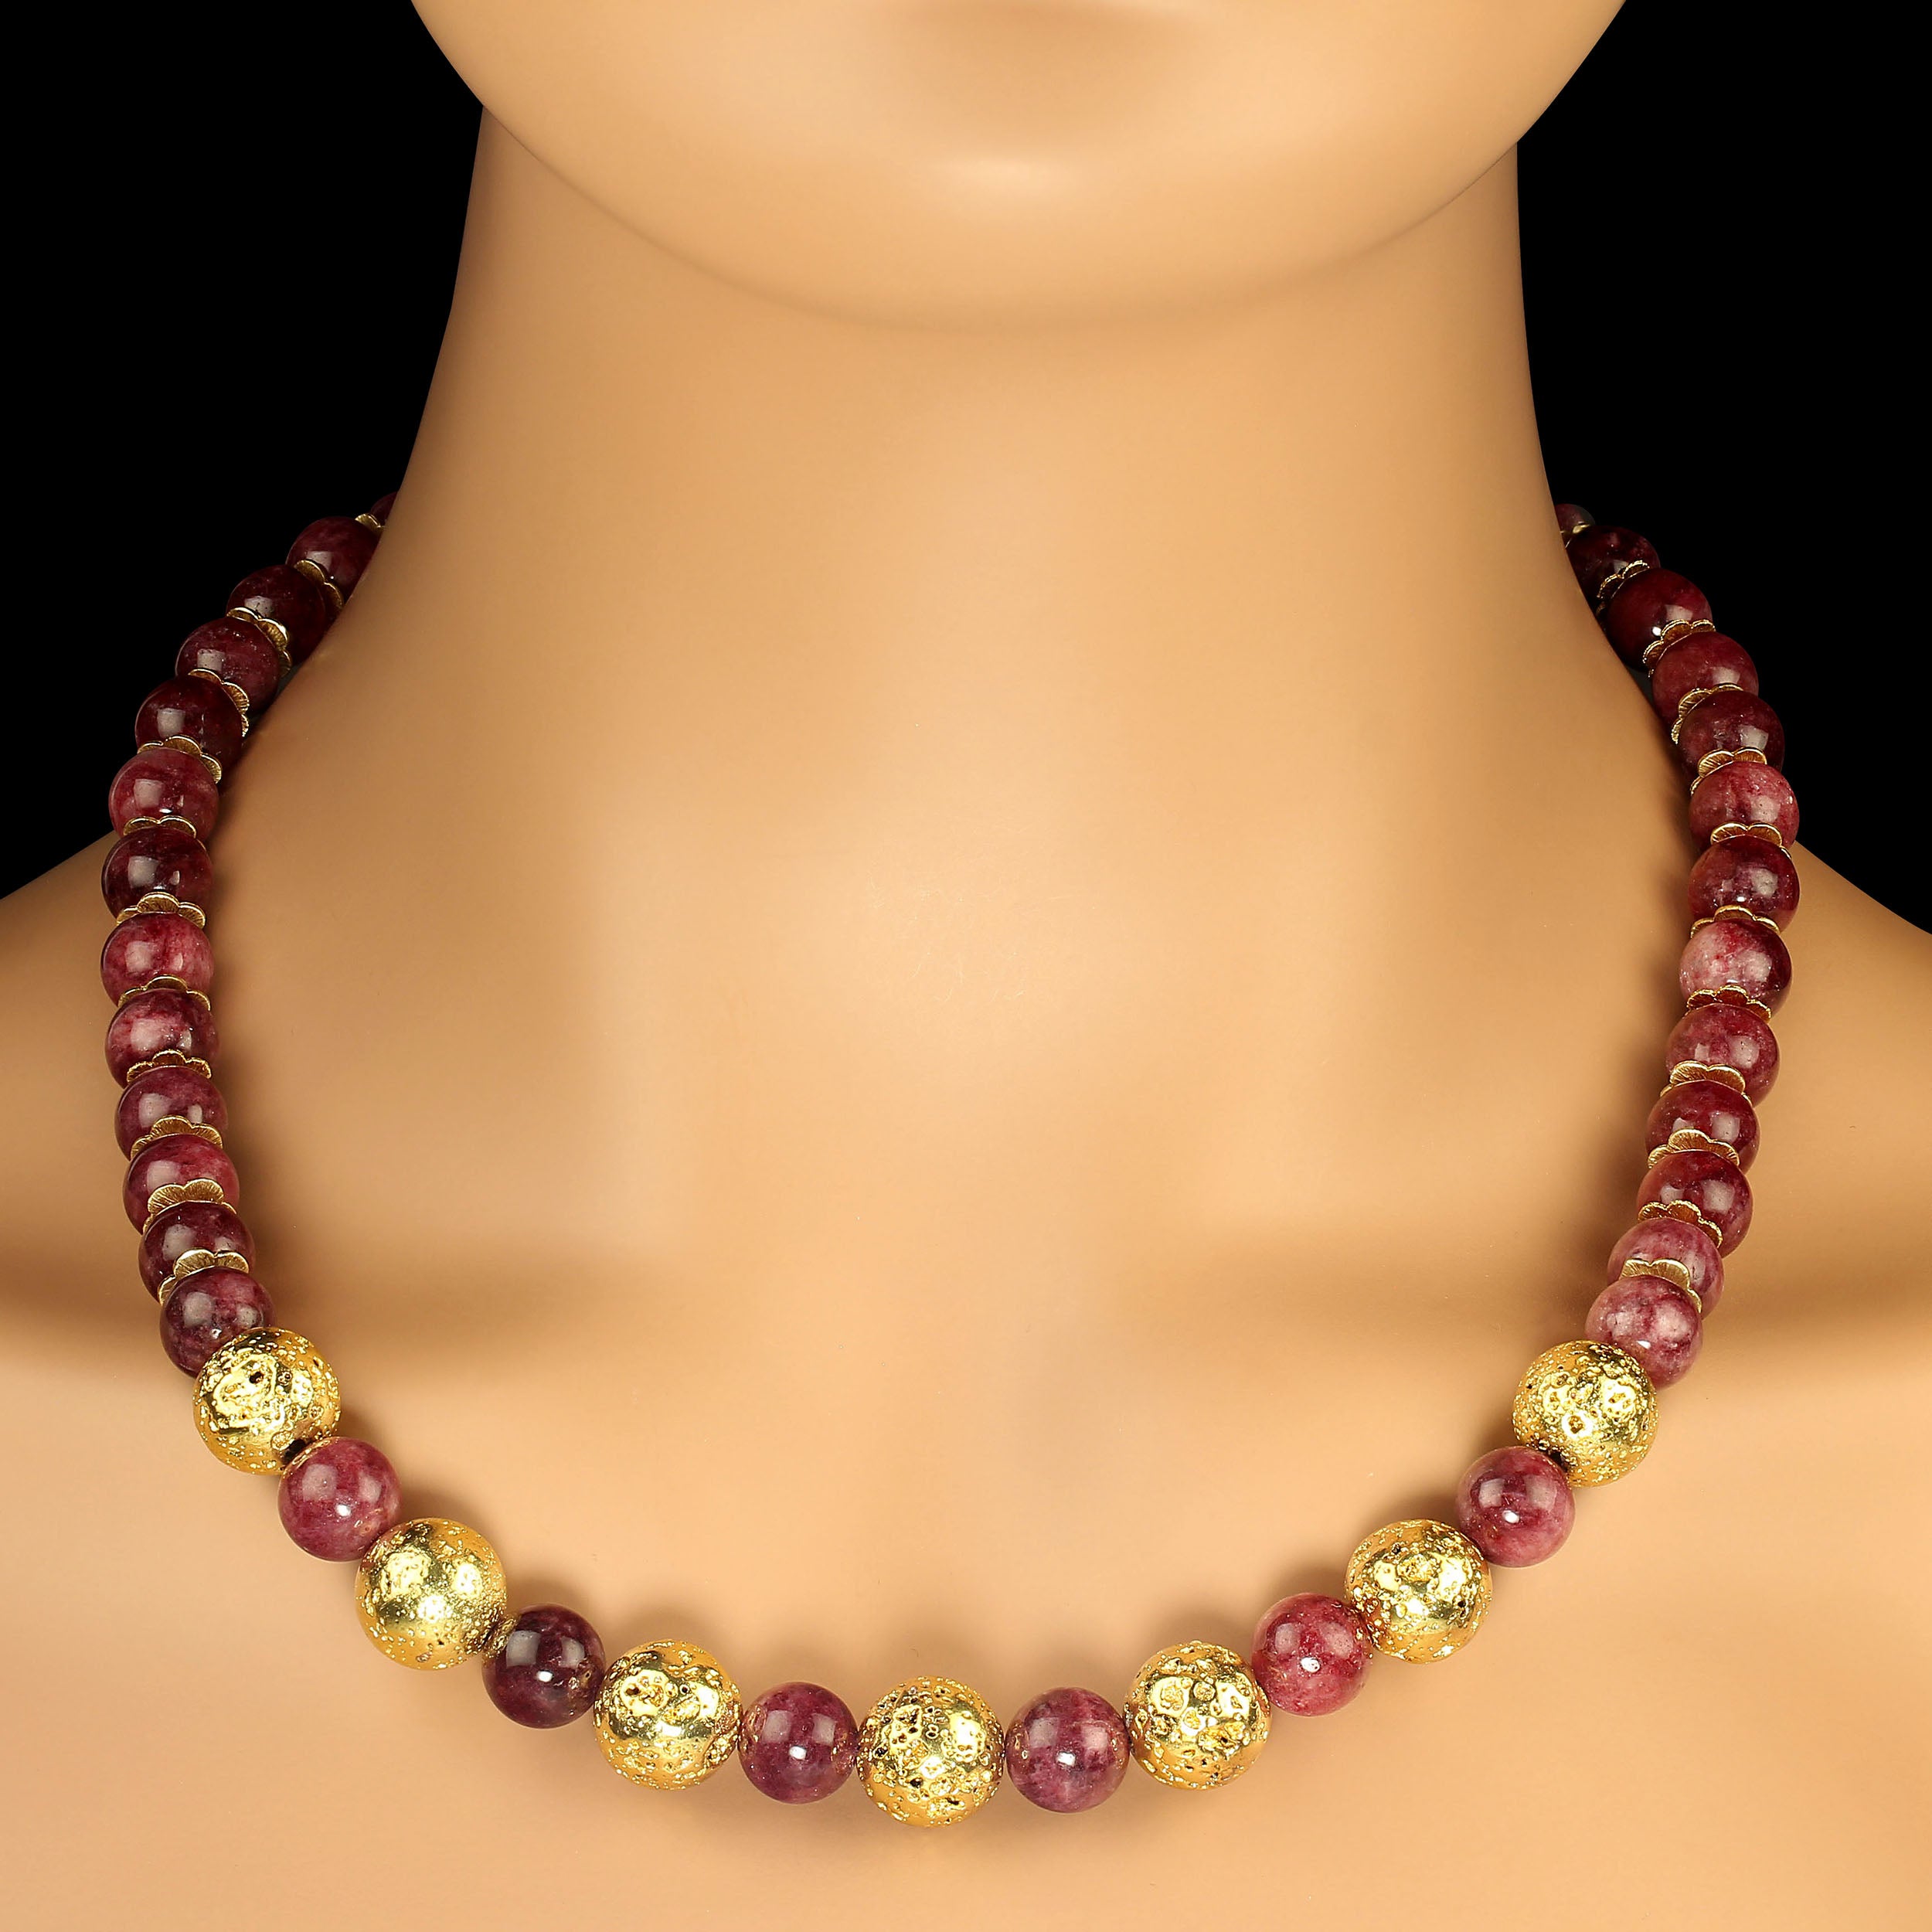 AJD 21 Inch Gorgeous Garnet Necklace Perfect for the January Birthday! For Sale